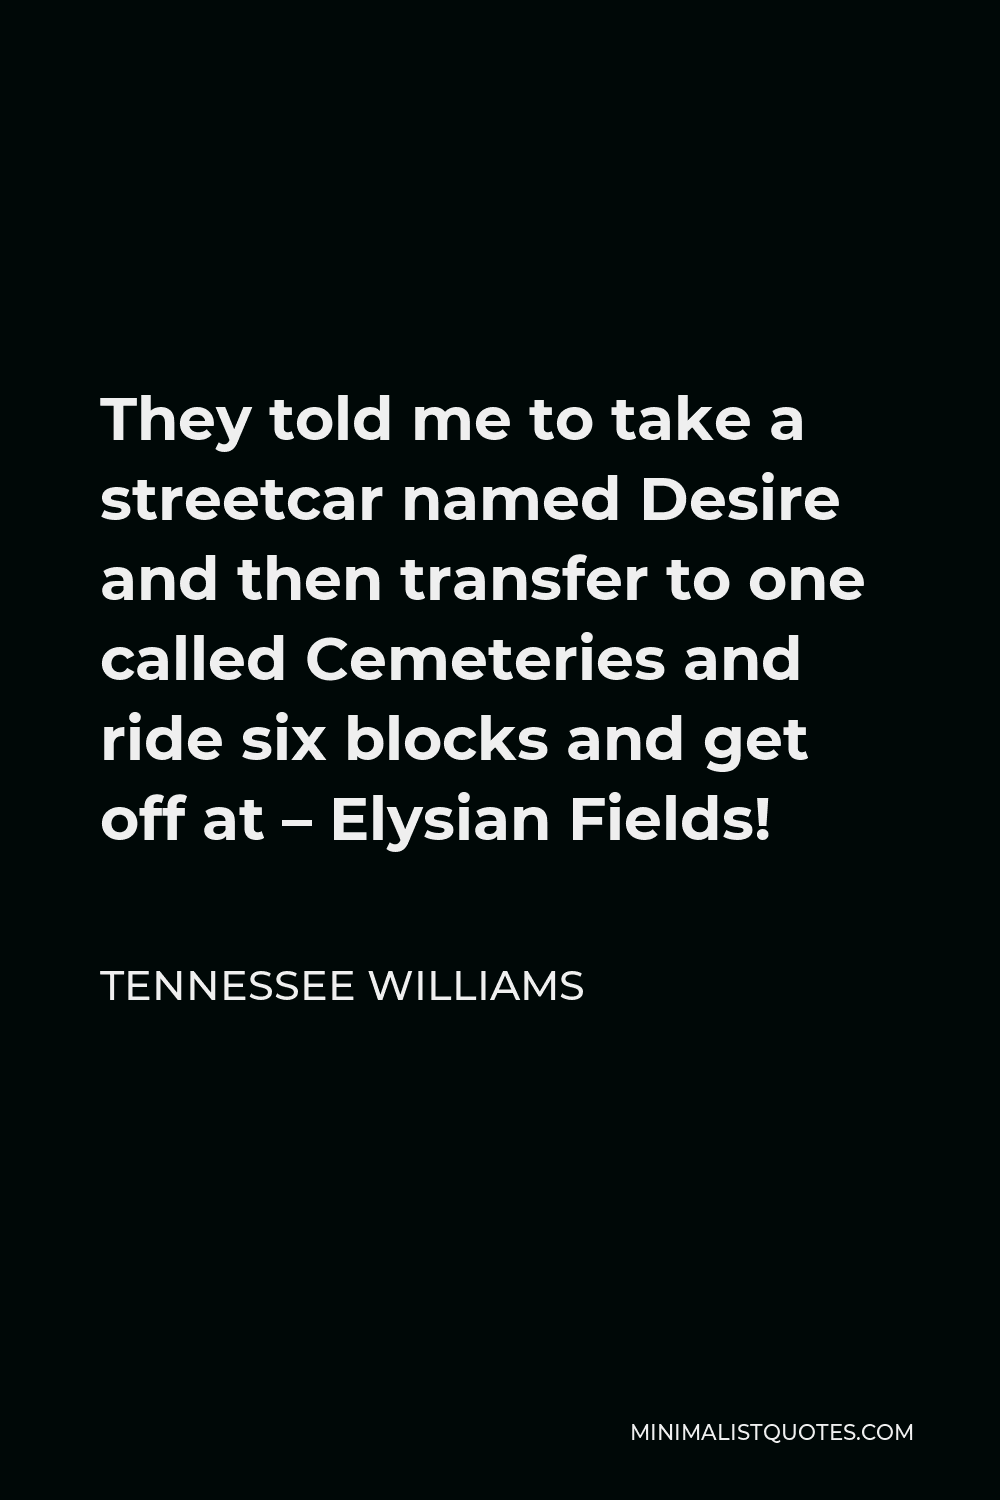 Tennessee Williams Quote - They told me to take a streetcar named Desire and then transfer to one called Cemeteries and ride six blocks and get off at – Elysian Fields!